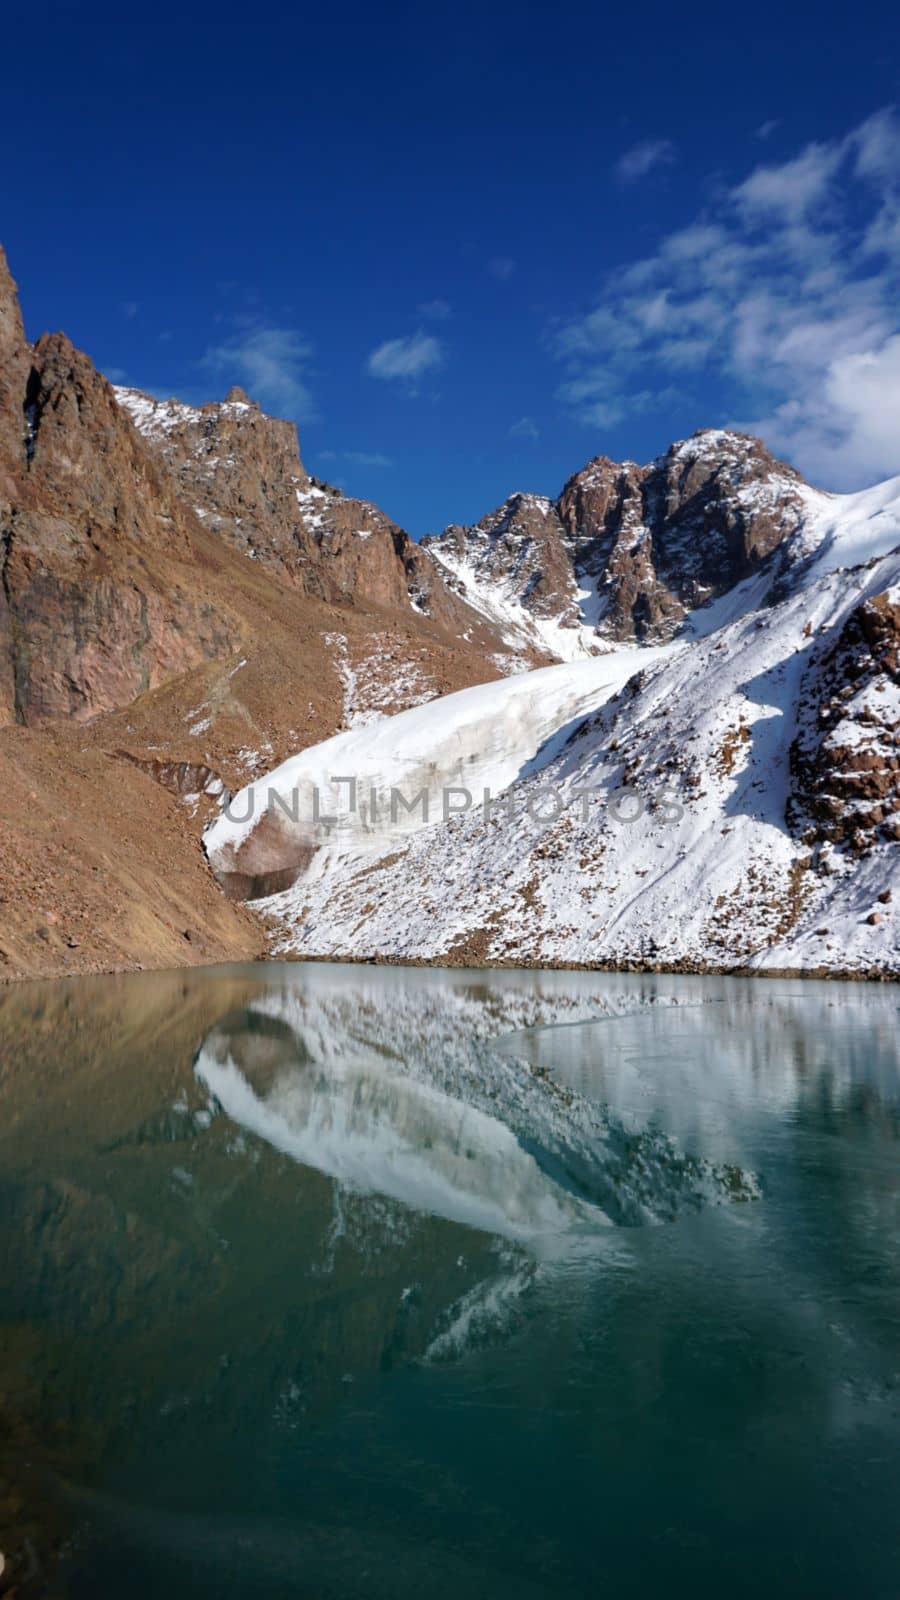 A mountain lake with emerald water reflects a glacier like a mirror. You can see the peaks of the mountains. The lake is partially frozen. There are large stones and snow in places. Moraine Lake